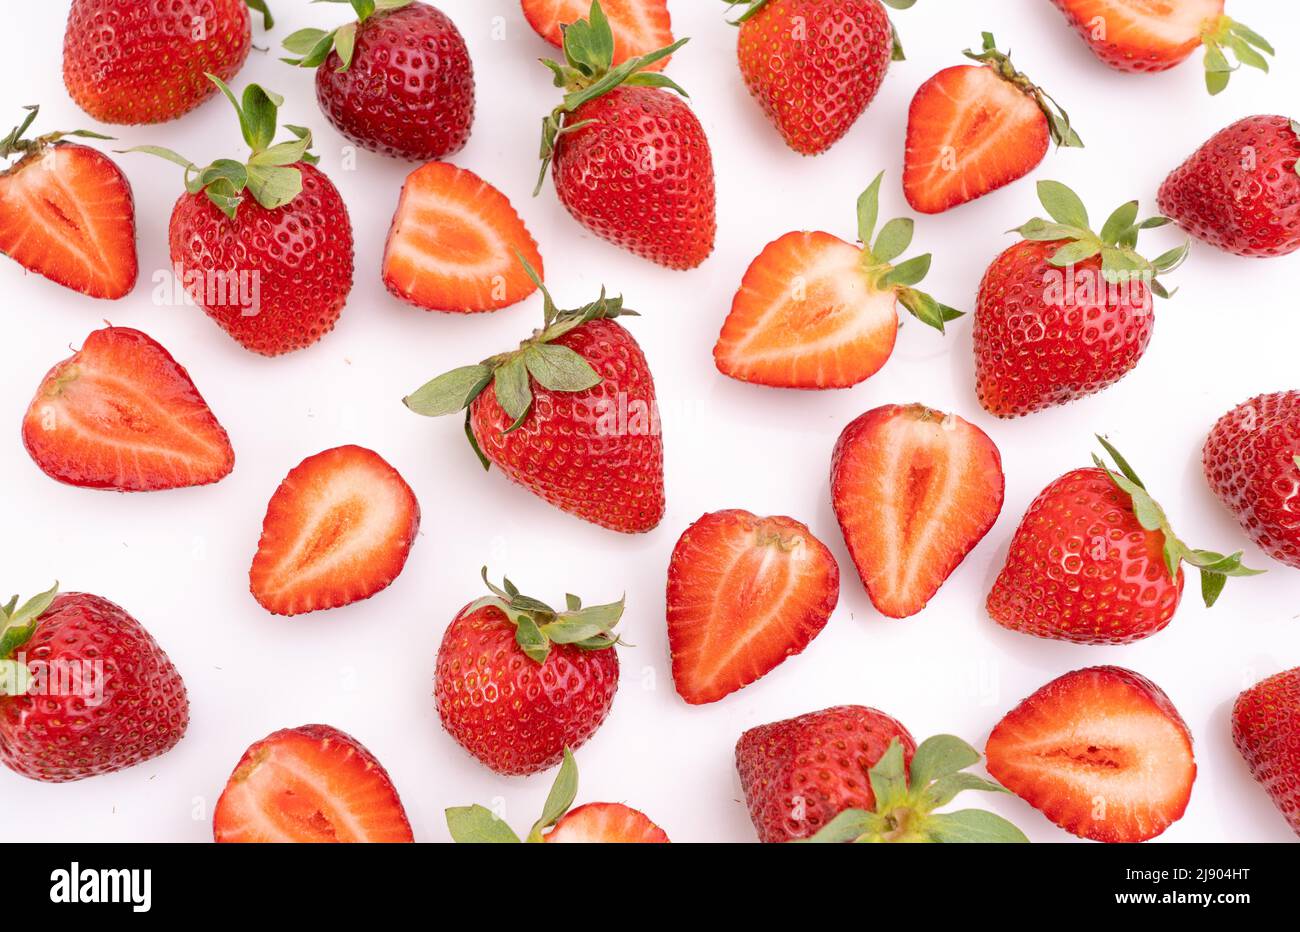 Fresh strawberries isolated on white background. Healty eating concept. Stock Photo